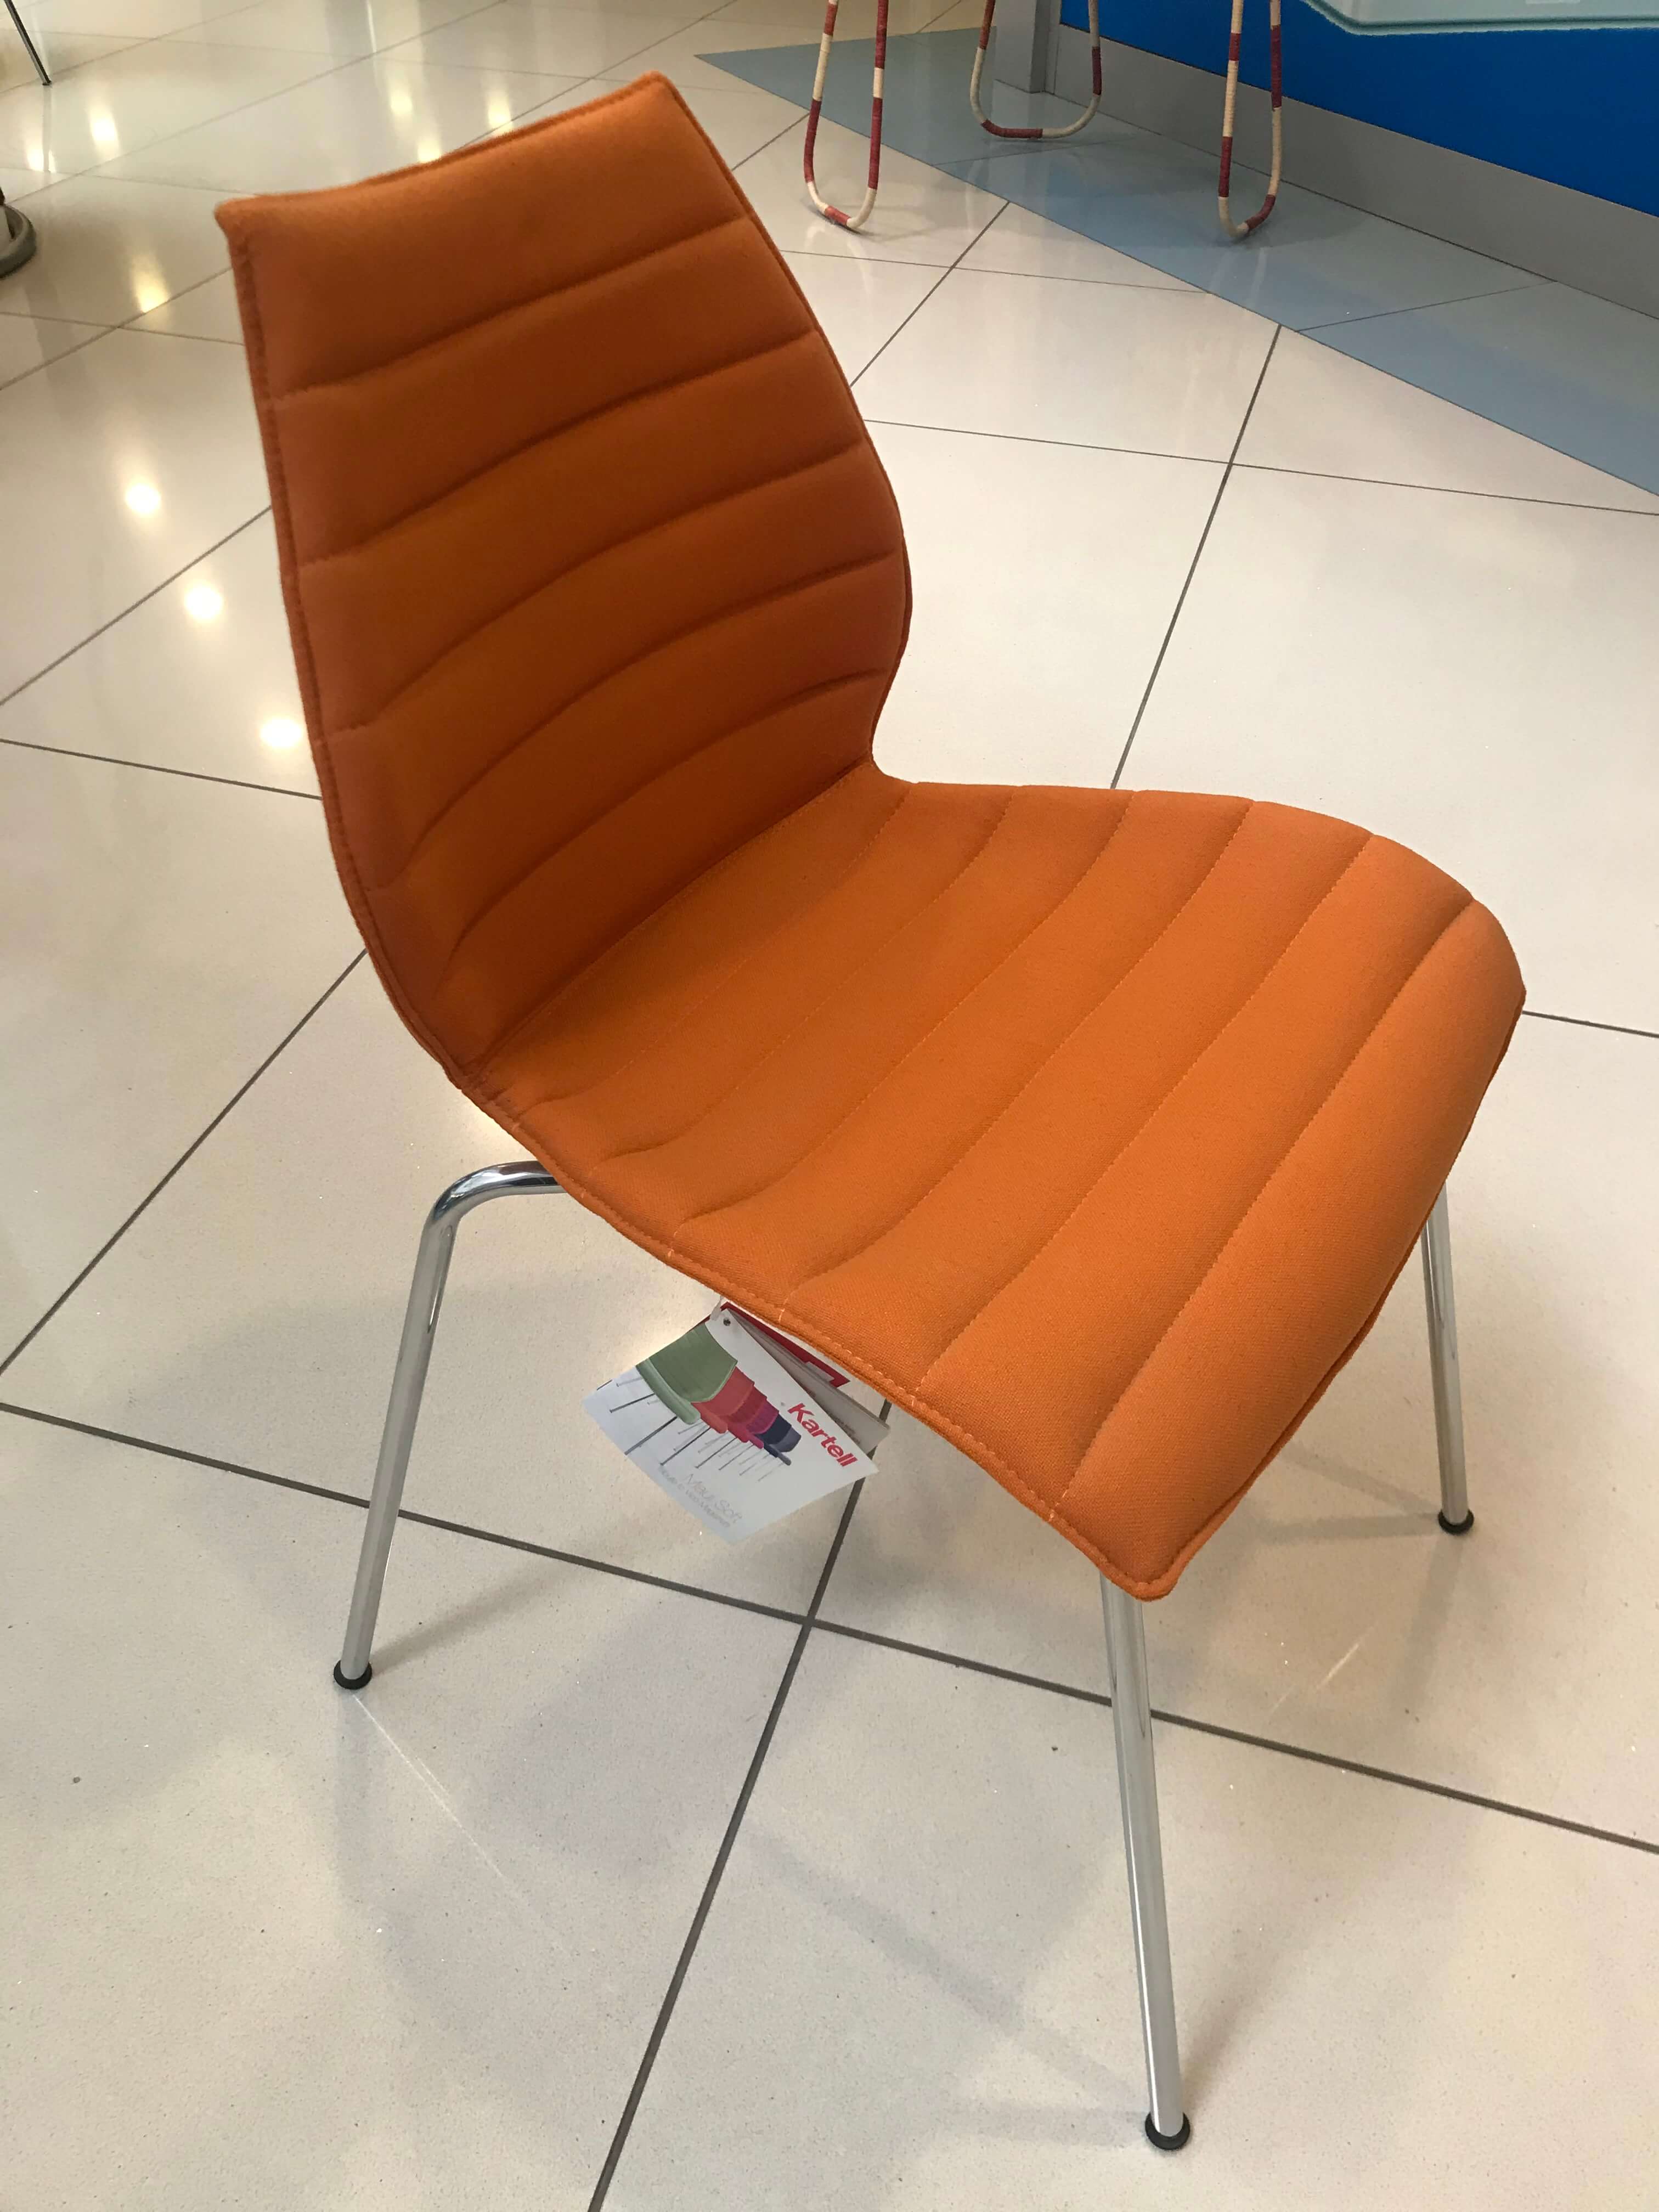 Maui chair by Kartell